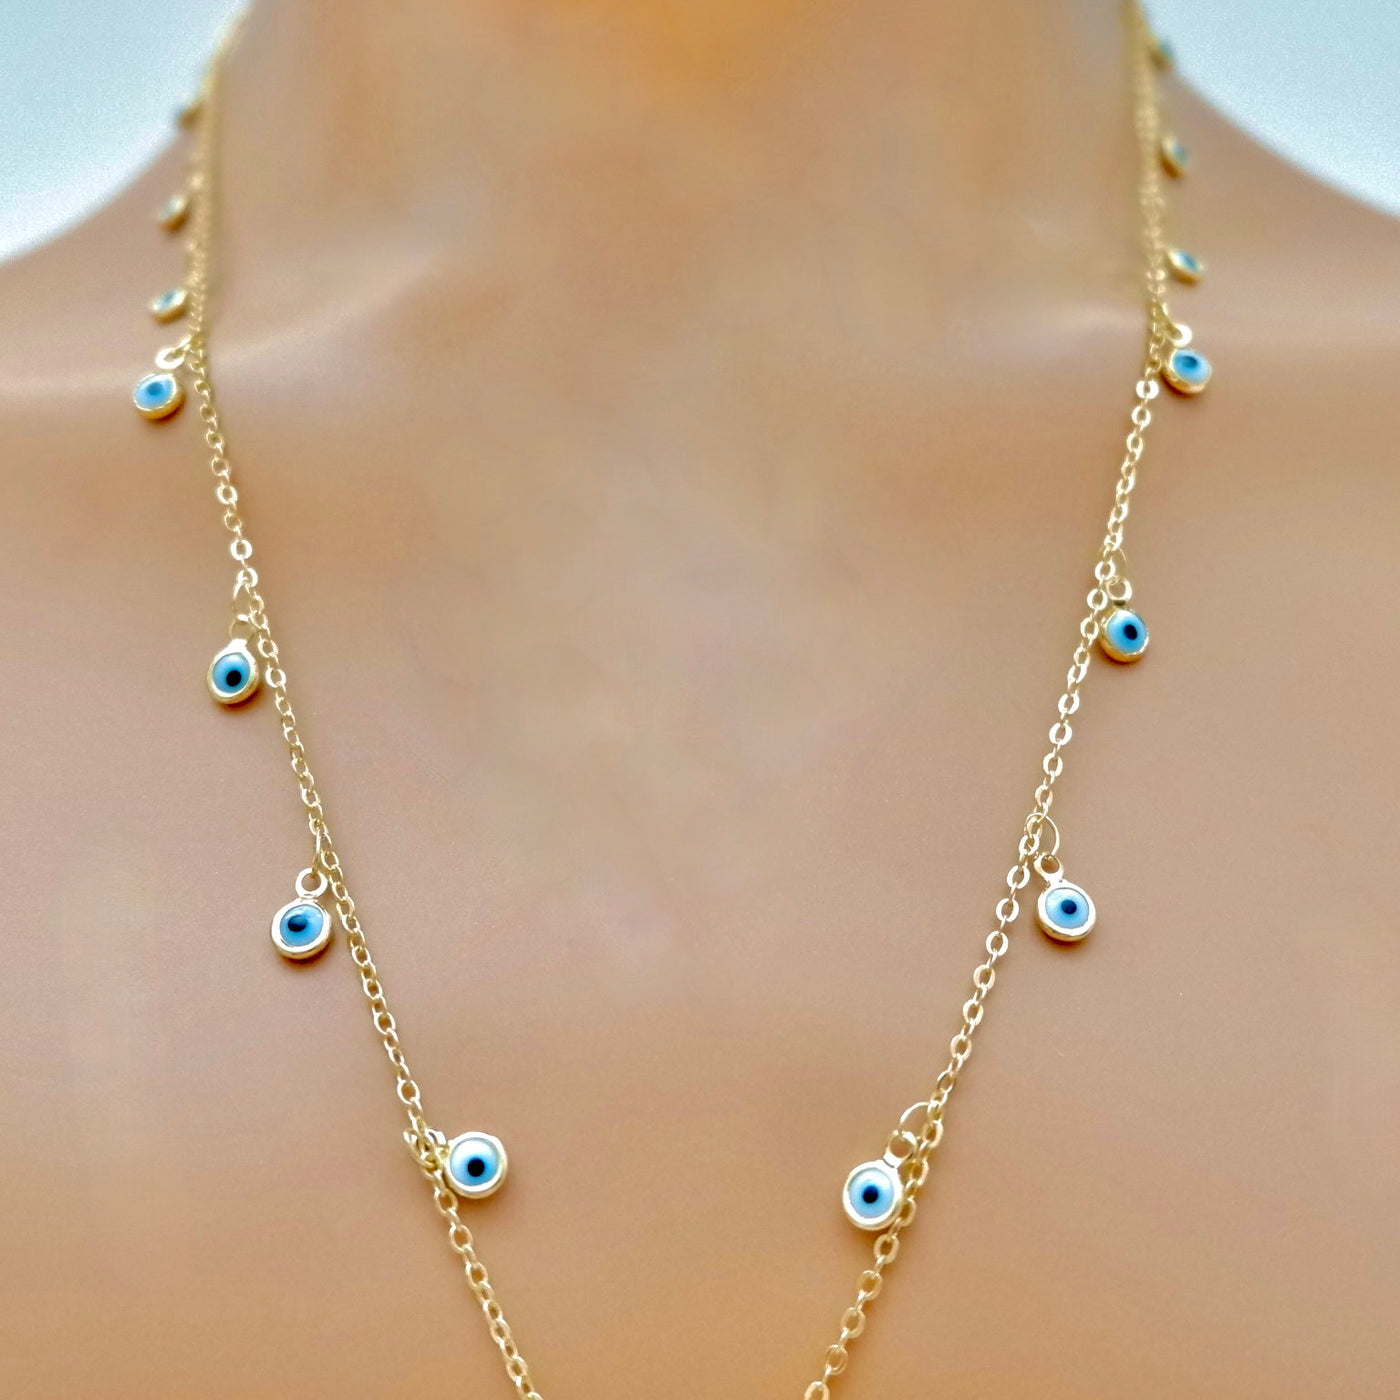 tiny dangling eye charm necklace